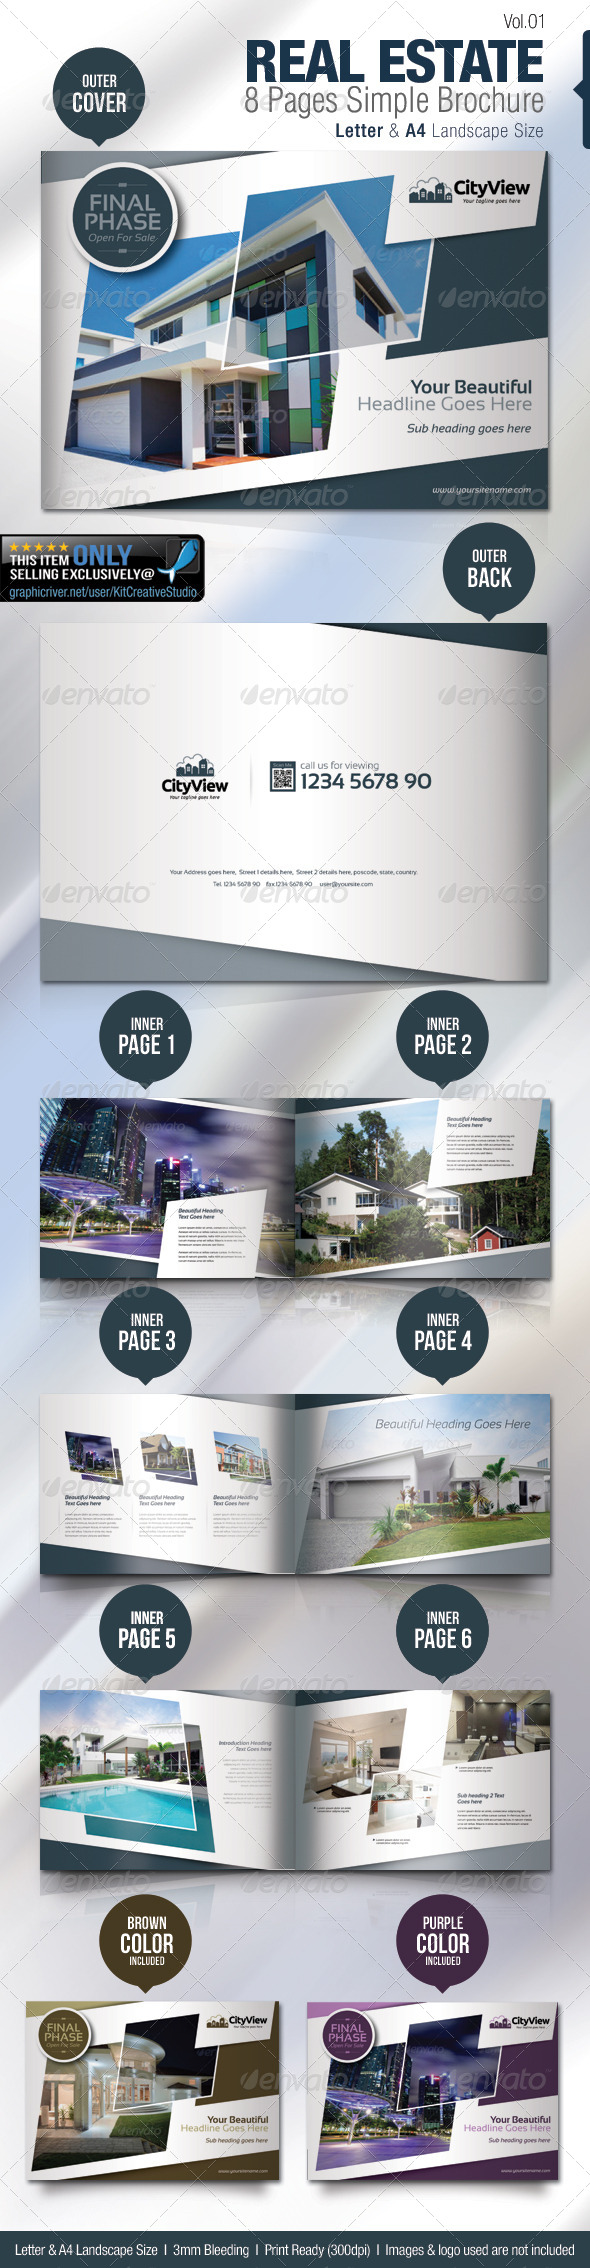 Real Estate 8 Pages Simple Brochure